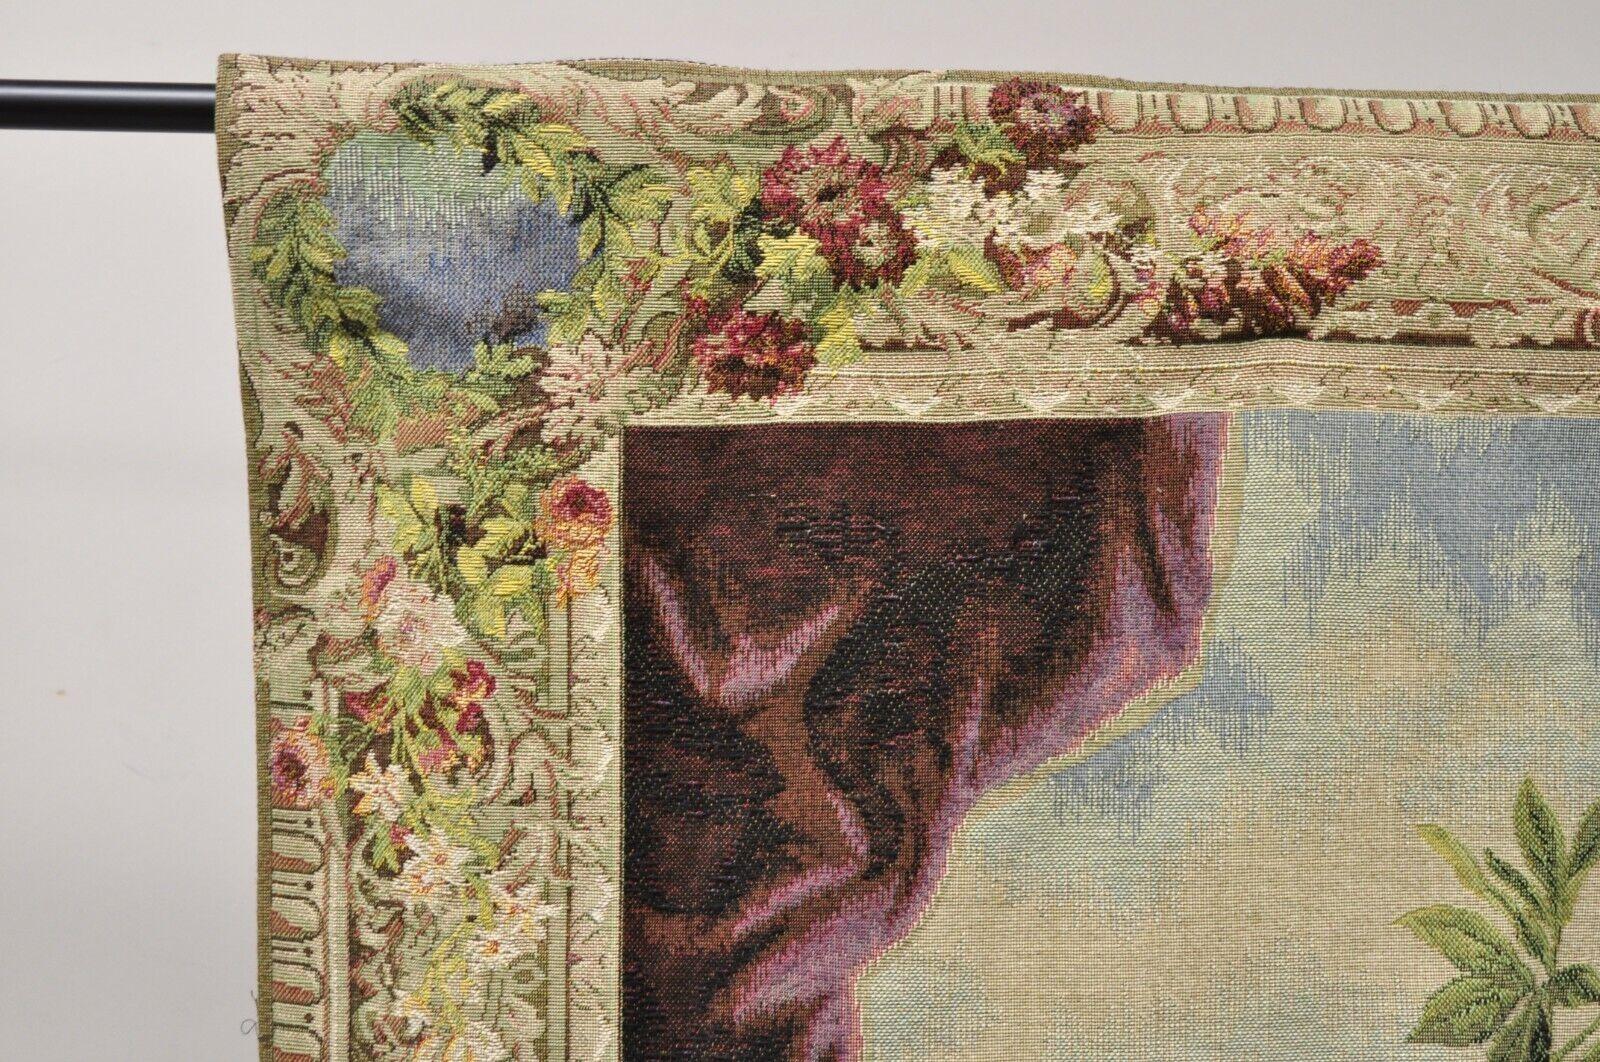 Contemporary Jacquard Woven French Wall Tapestry Still Life Flowers & Mandolin by J&D For Sale